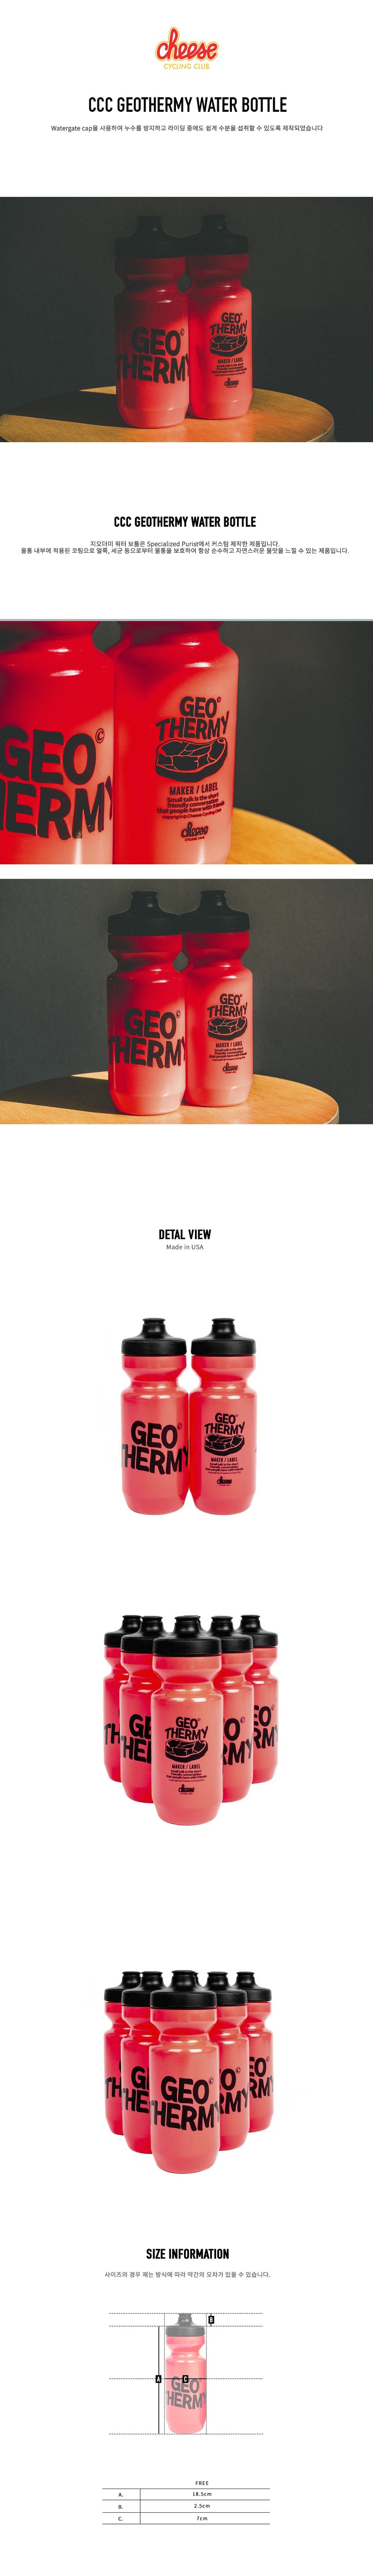 CCC GEOTHERMY WATER BOTTLE